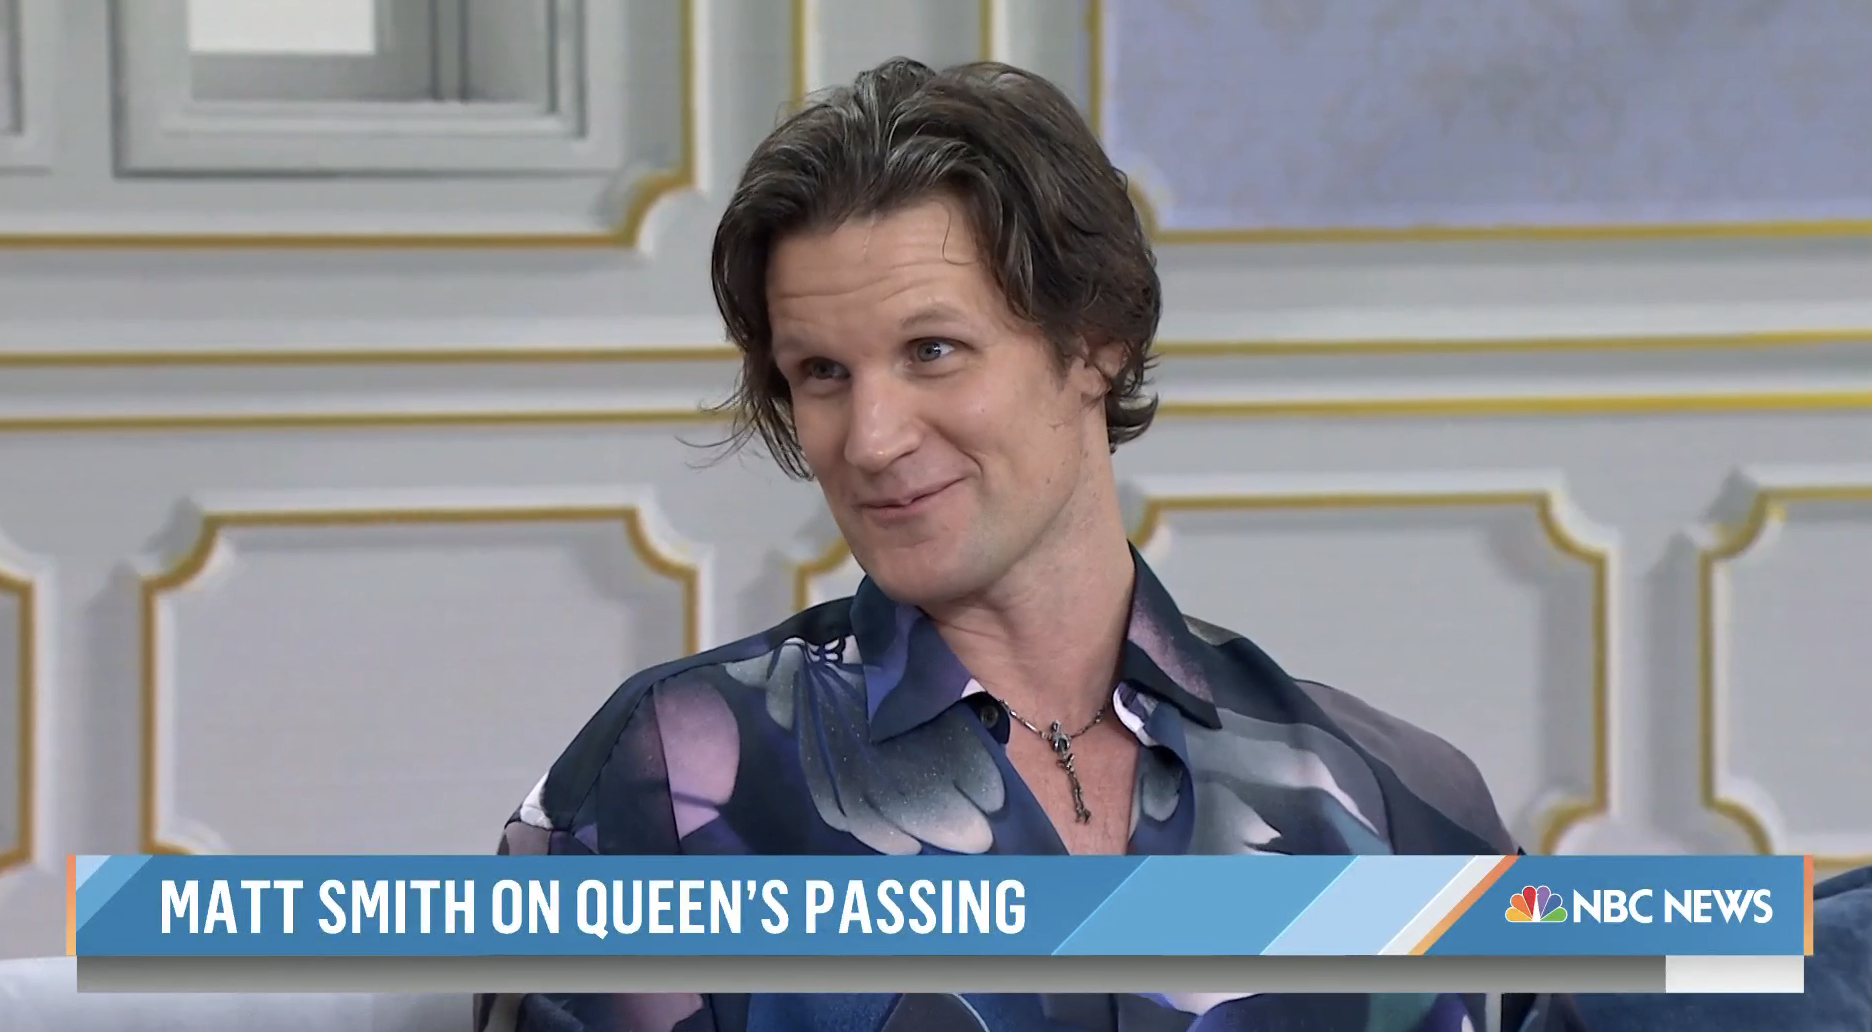 Matt on the Today show with the caption &quot;Matt Smith on Queen&#x27;s passing&quot;